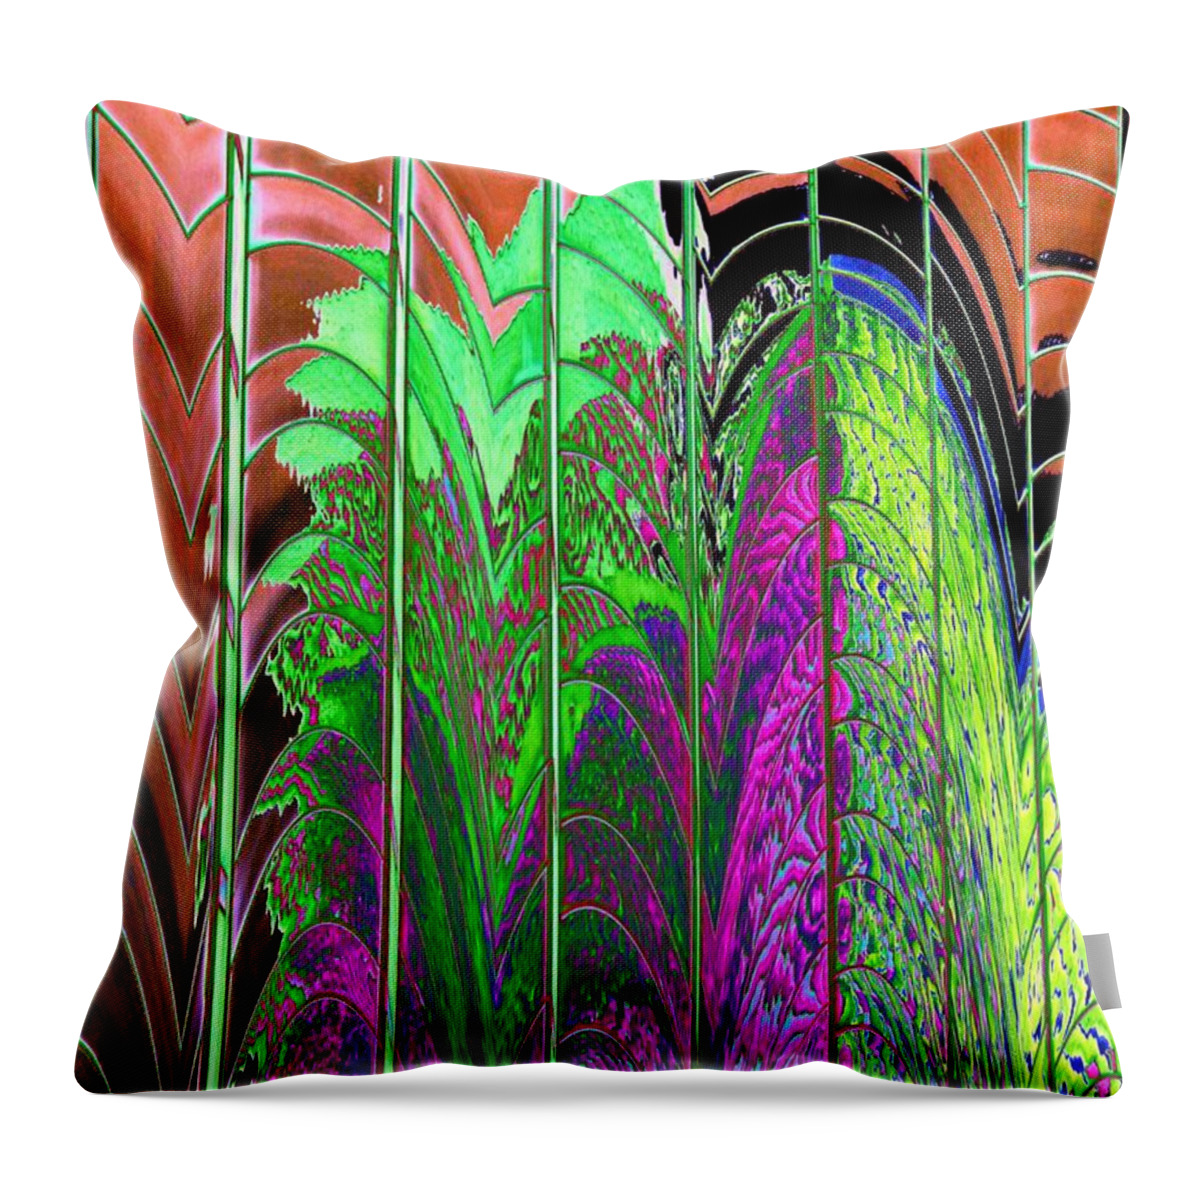 Reflection Throw Pillow featuring the photograph Reflection 2 by Tim Allen